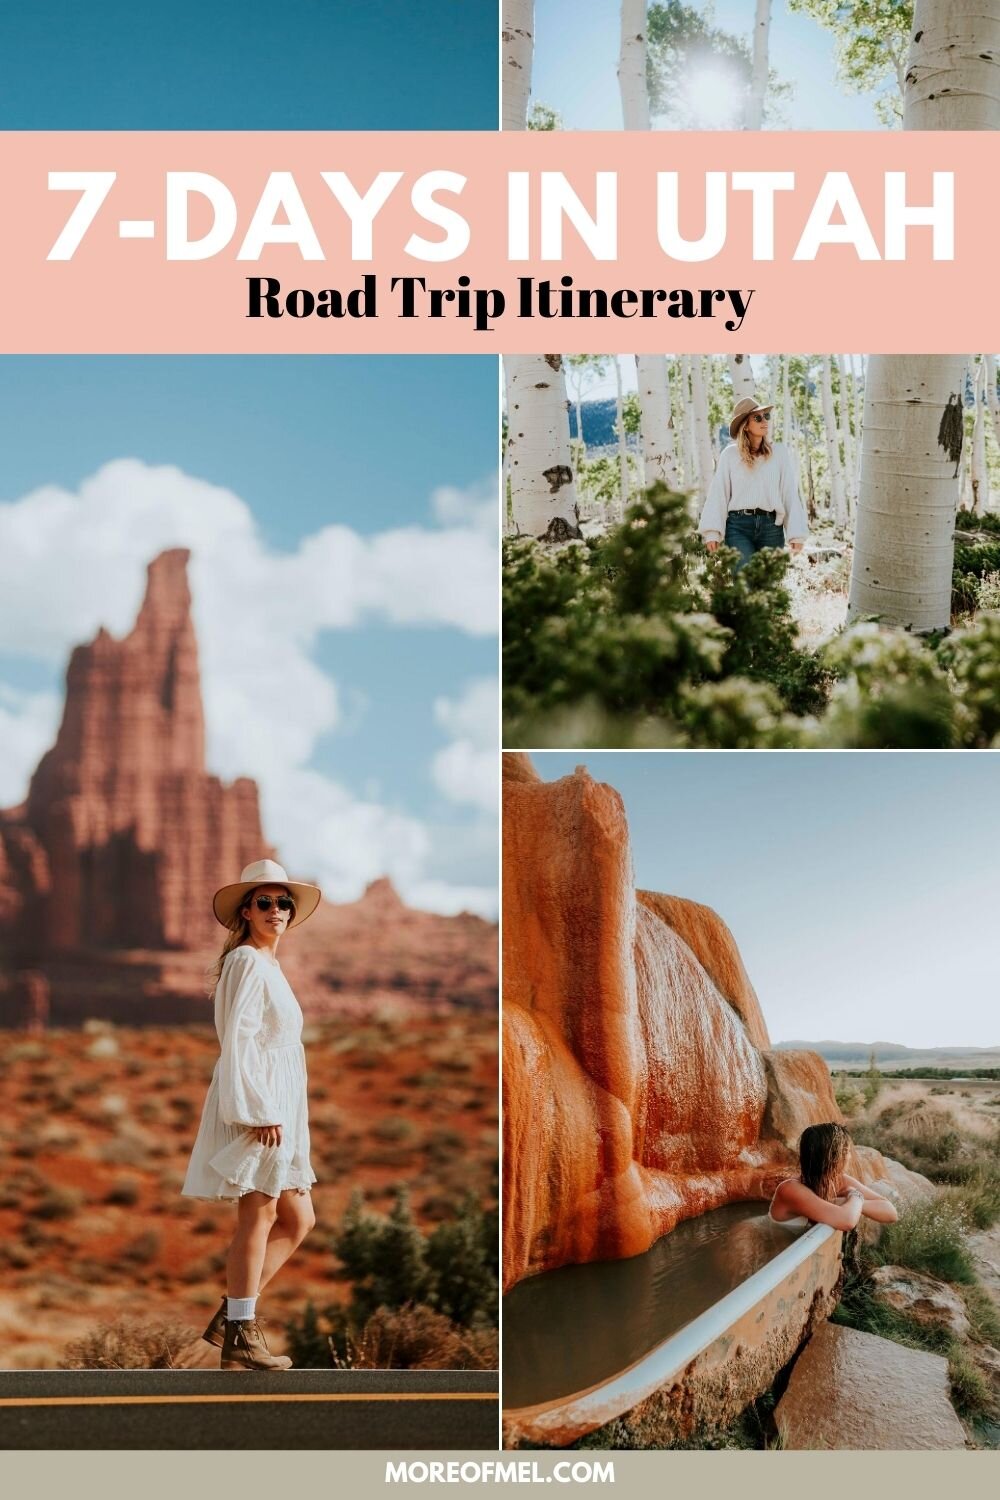  Get the perfect 7 day Utah road trip itnerary and Utah road trip map of all the best places to see in Utah. #utah #roadtrip #southwest | things to do in Utah road trip | things to do in Moab Utah | Utah National Parks road trip | Utah road trip Nati